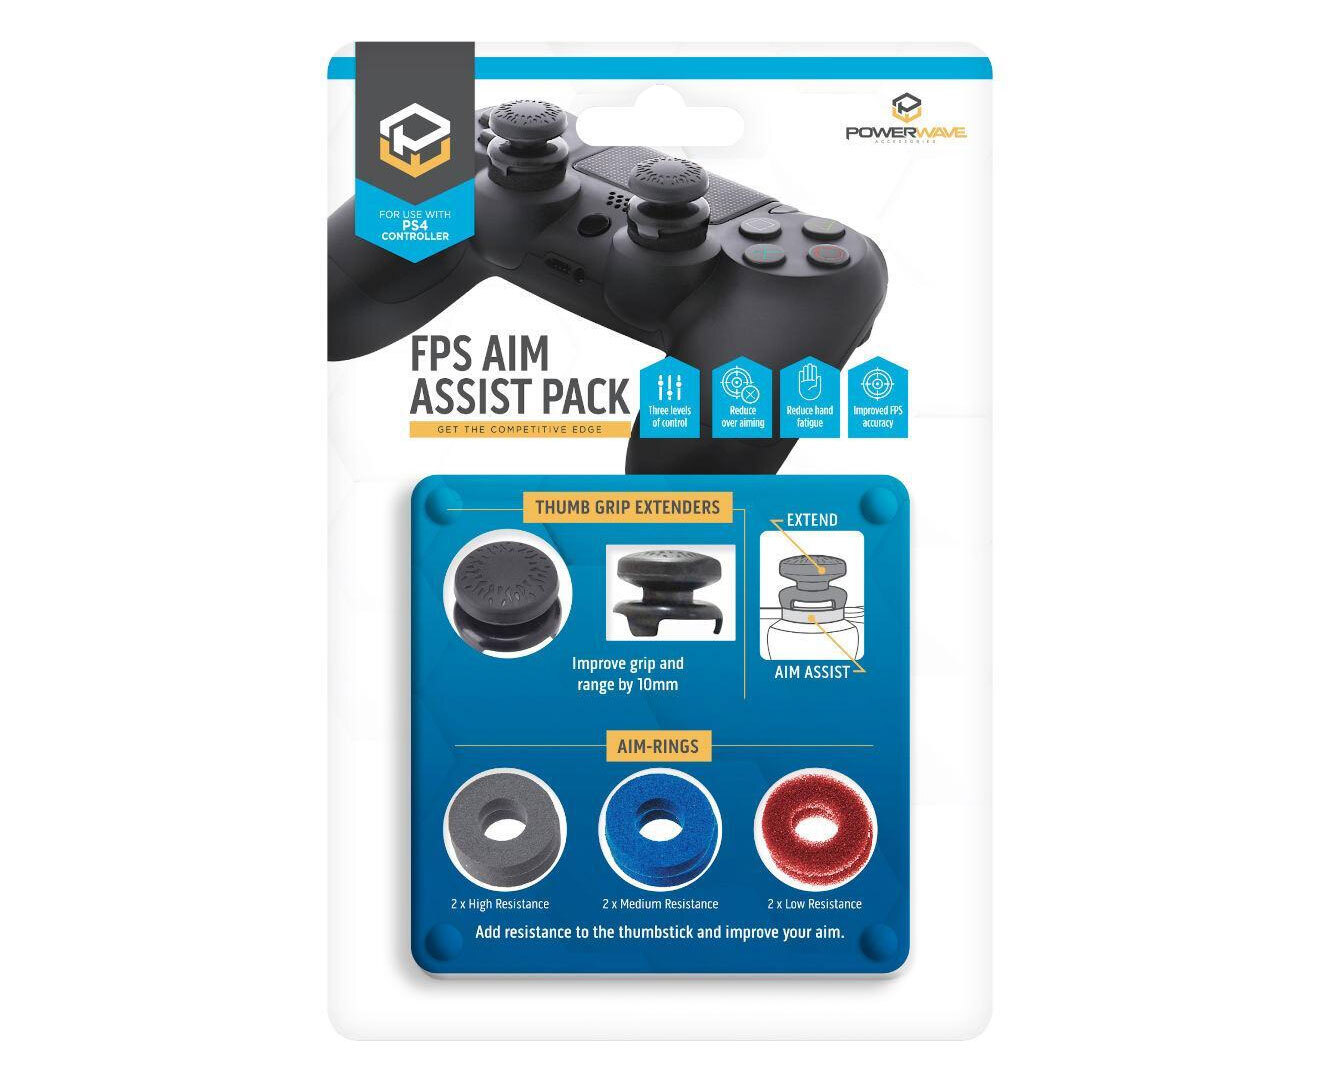 PS4 Controller FPS Aim Assist Pack